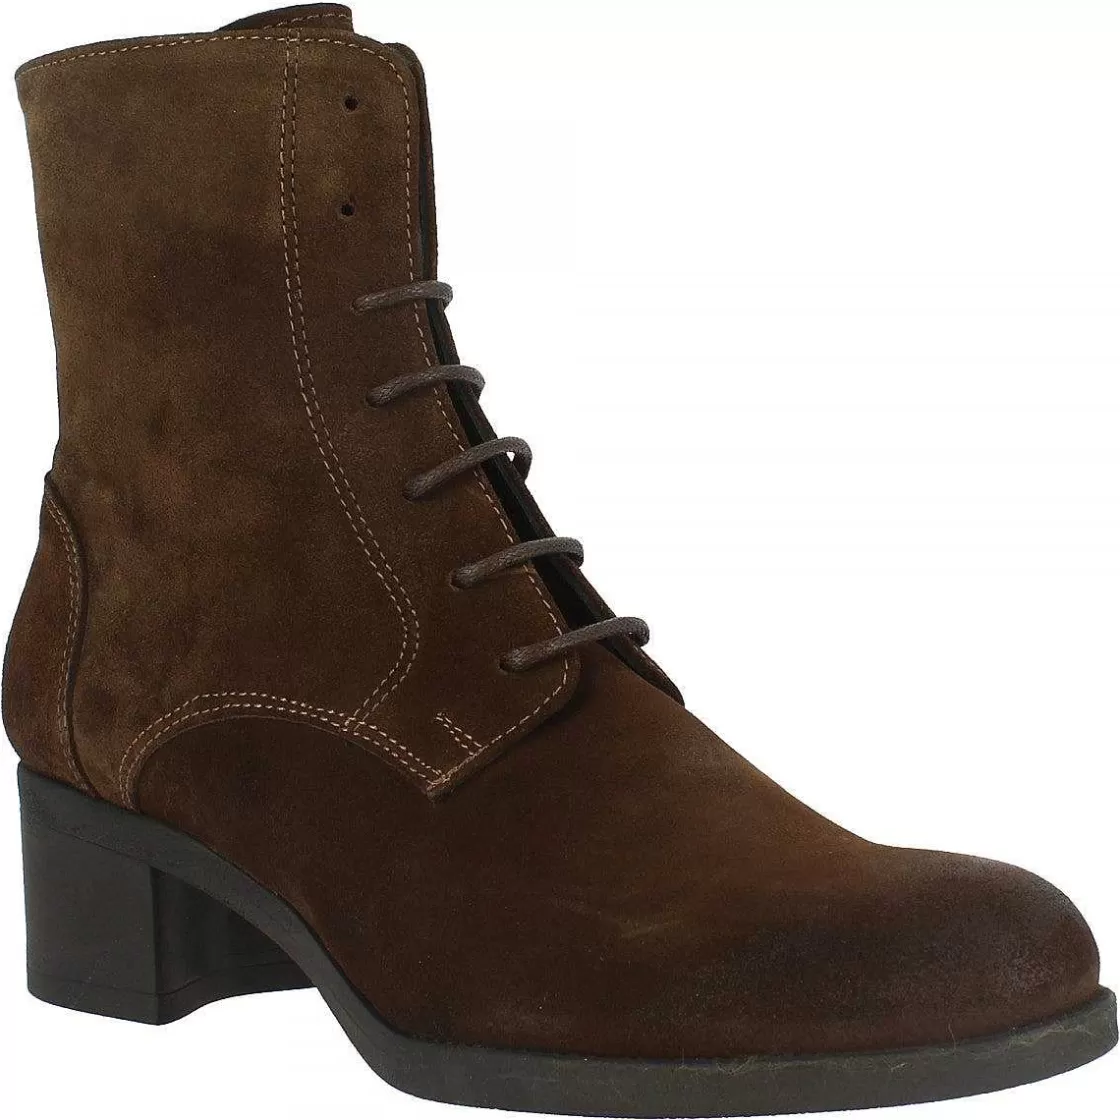 Leonardo Women'S Handmade Lace-Up Ankle Boots In Dark Brown Suede With Zip Outlet